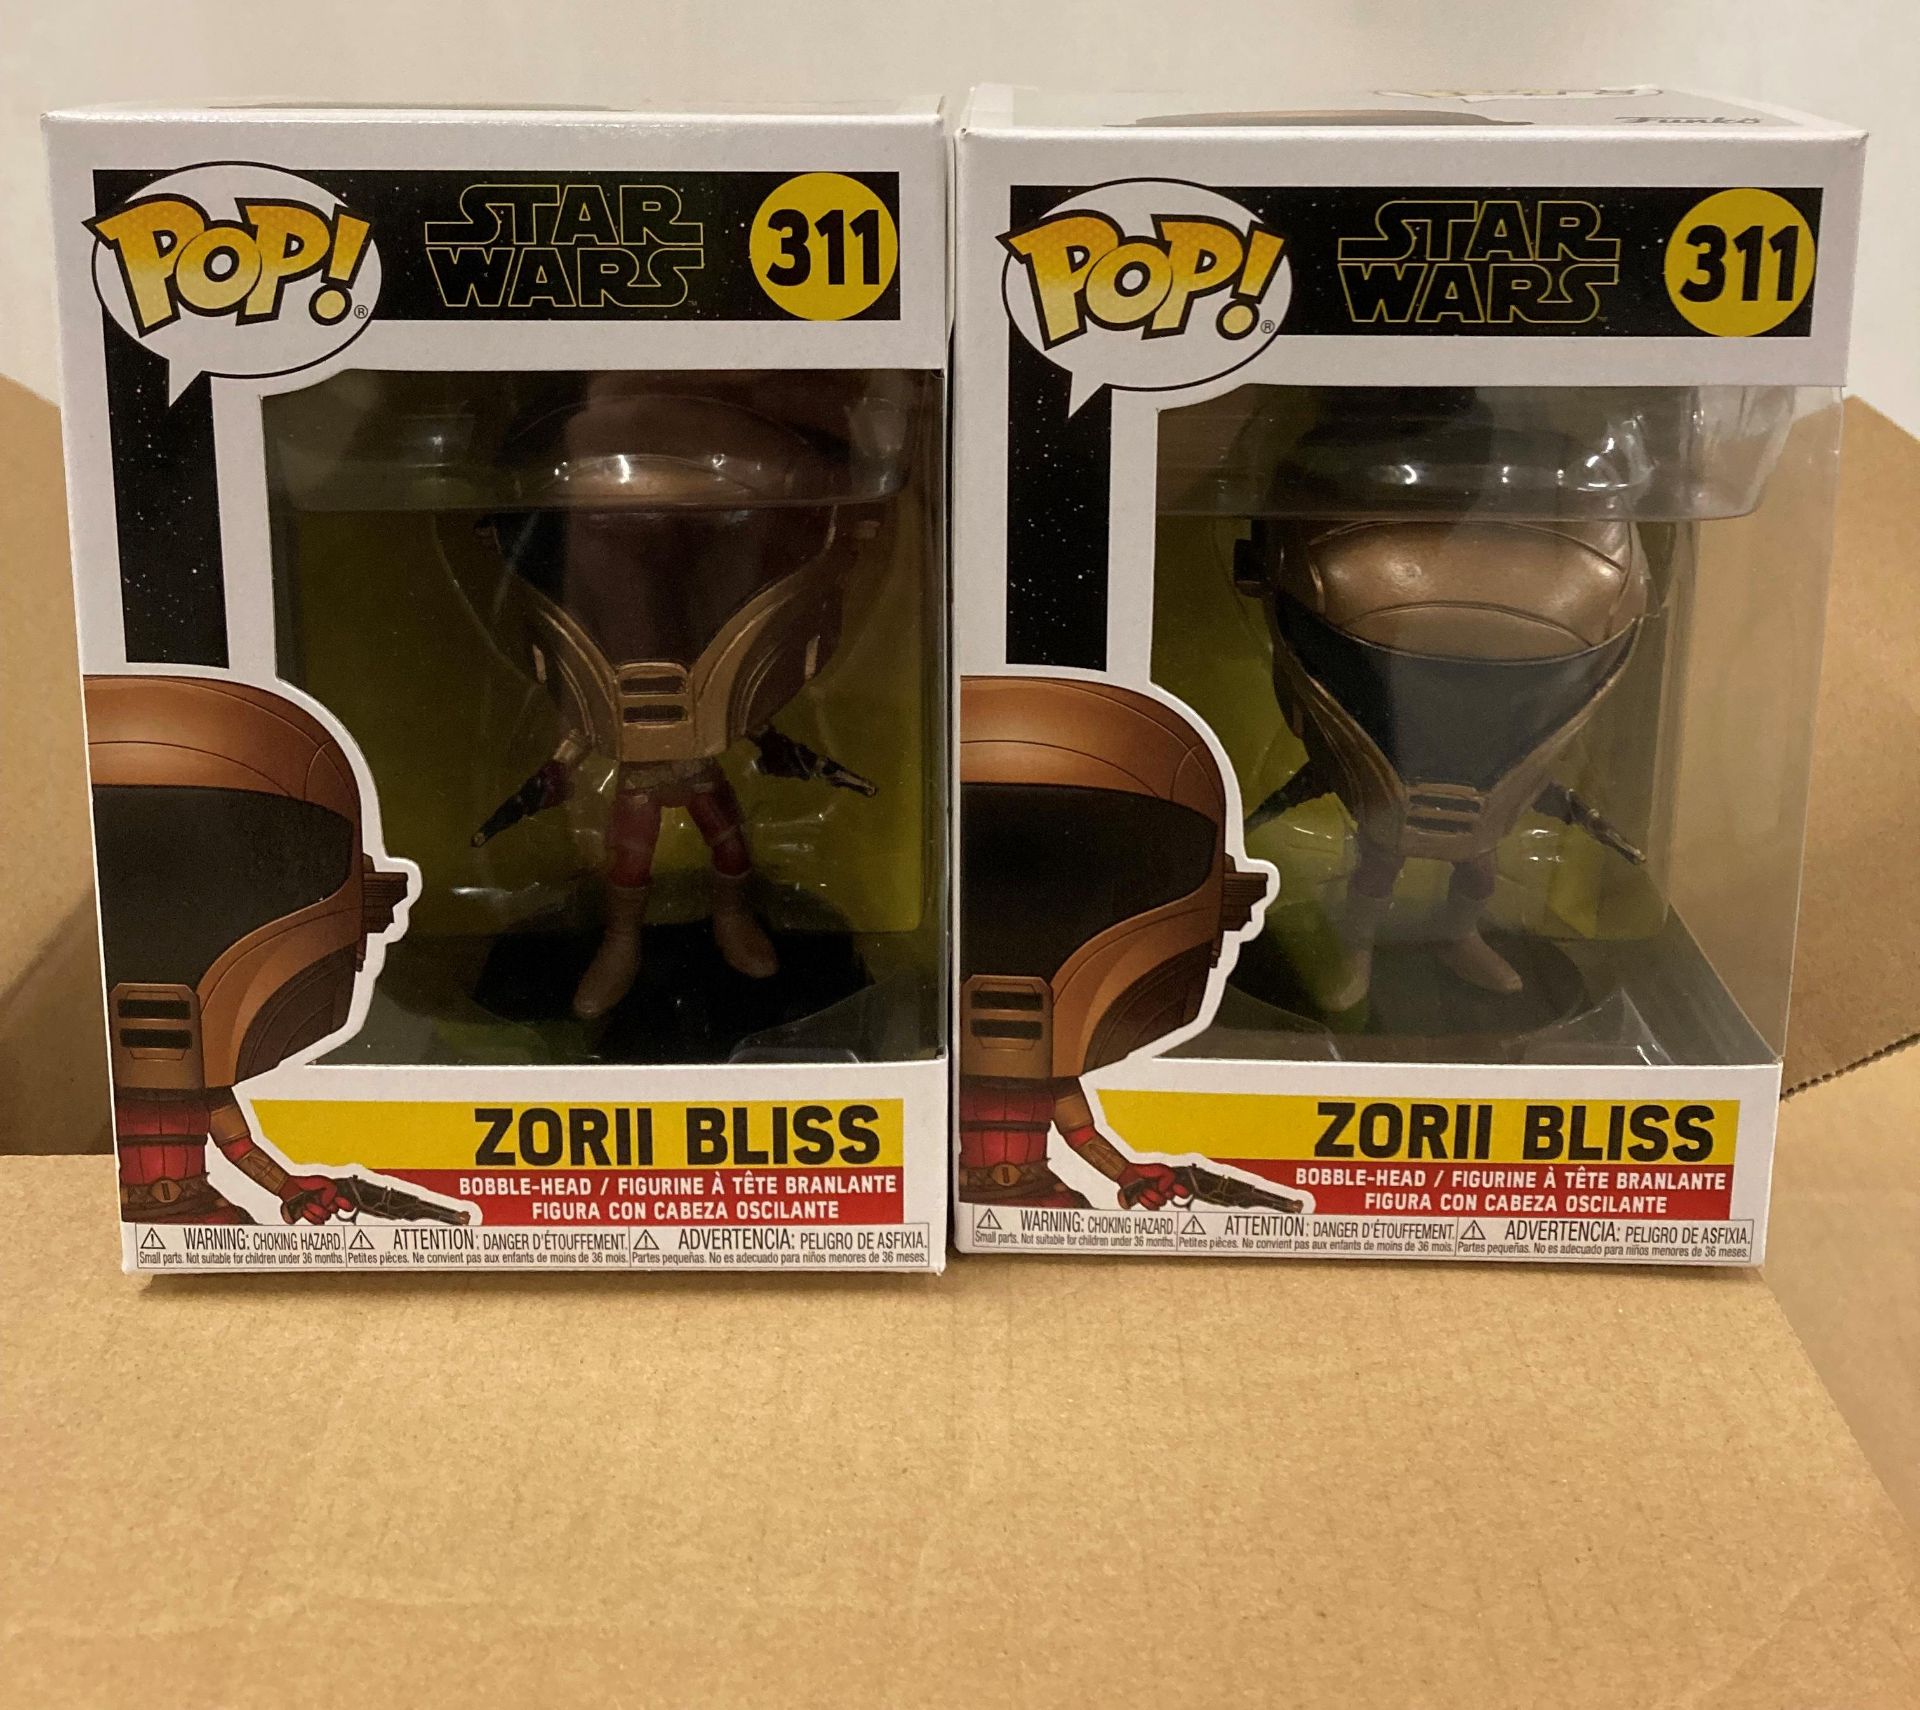 2 x Boxes of 36 x Funko POP! Figurine Star Wars: The Rise of Skywalker - Zorii Bliss (saleroom - Image 2 of 2